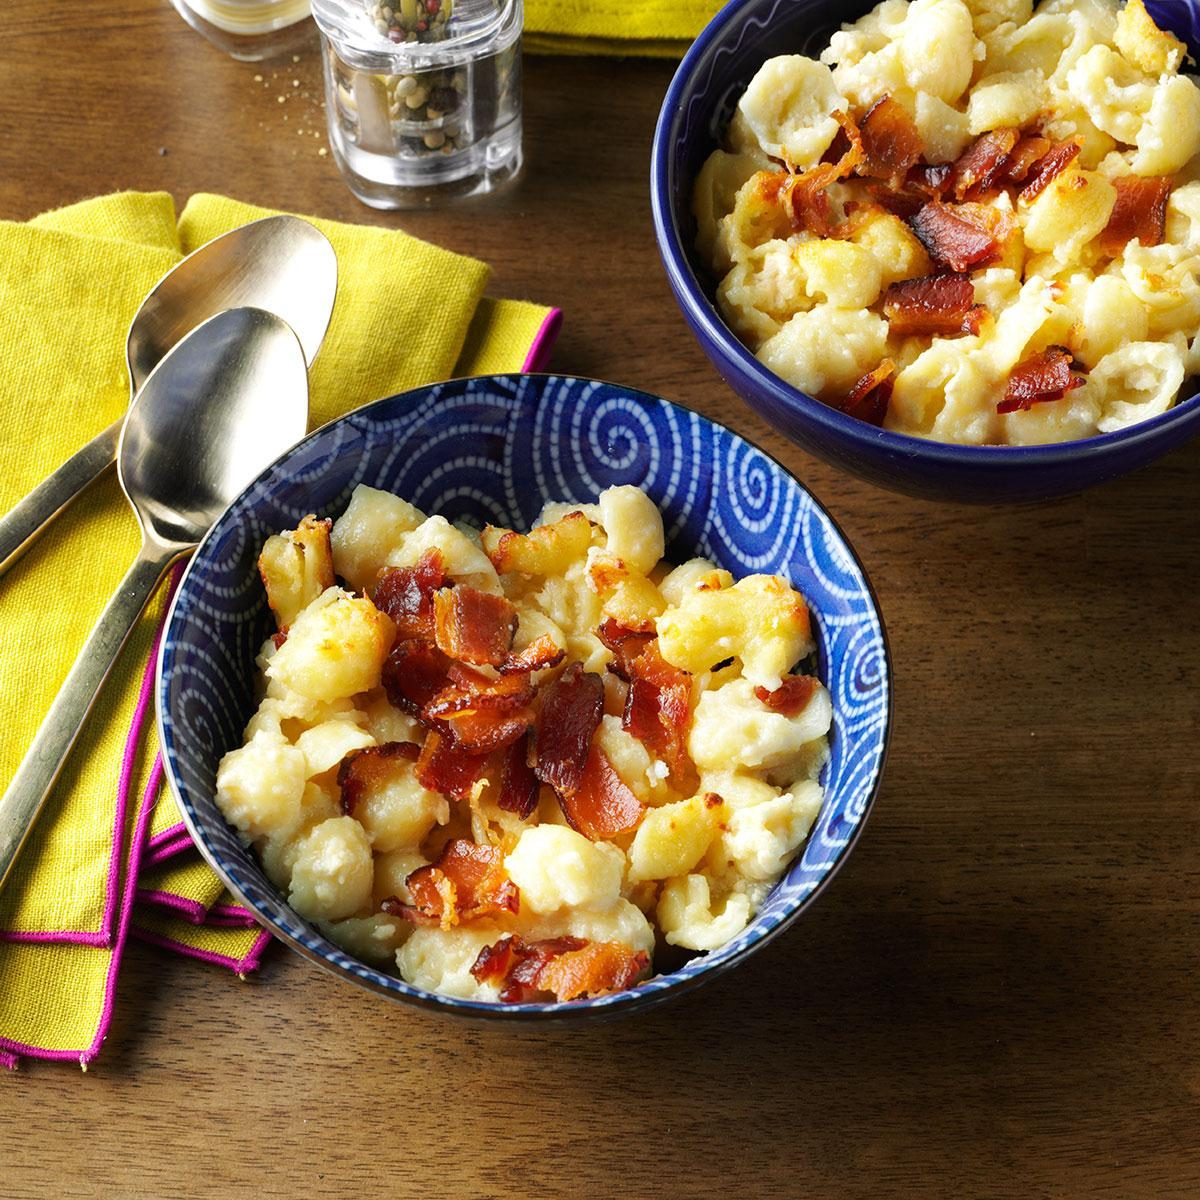 Inspired by: Bonefish Grill’s Applewood Bacon Mac & Cheese